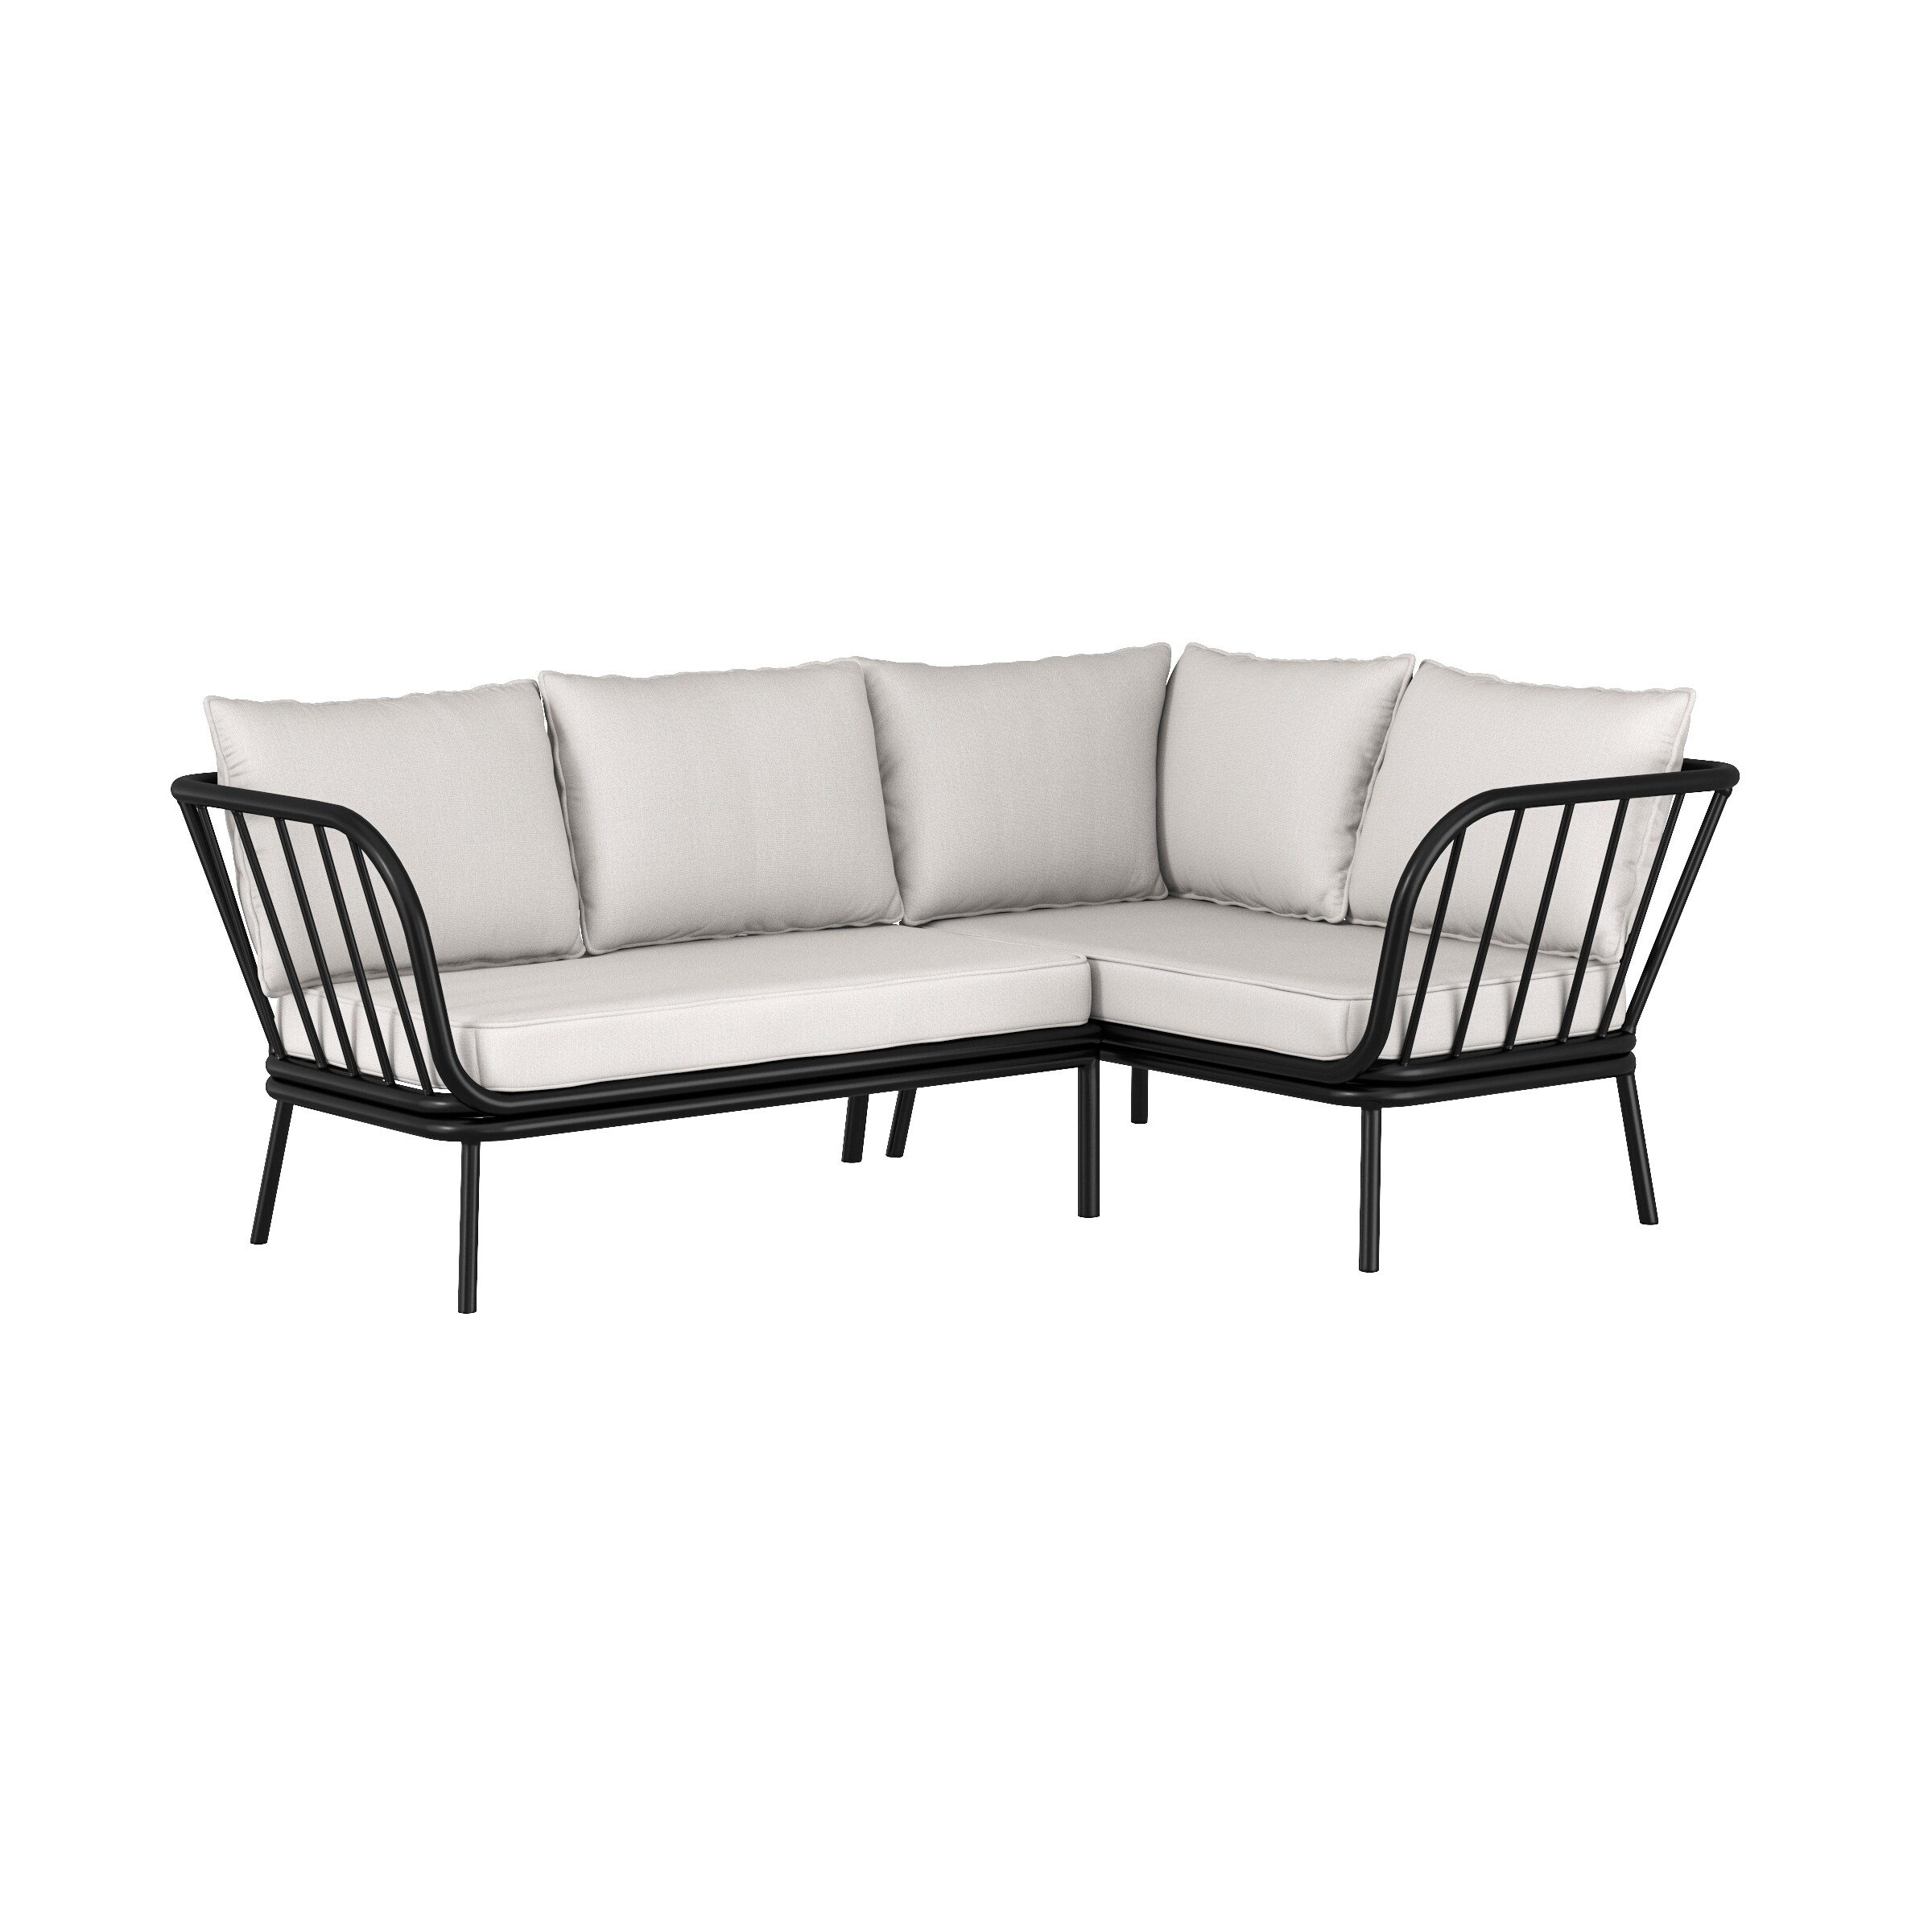 neerhalen rijk teer Style Selections Westchester Outdoor Loveseat Off-white Cushion(S) and  Steel Frame in the Patio Sectionals & Sofas department at Lowes.com